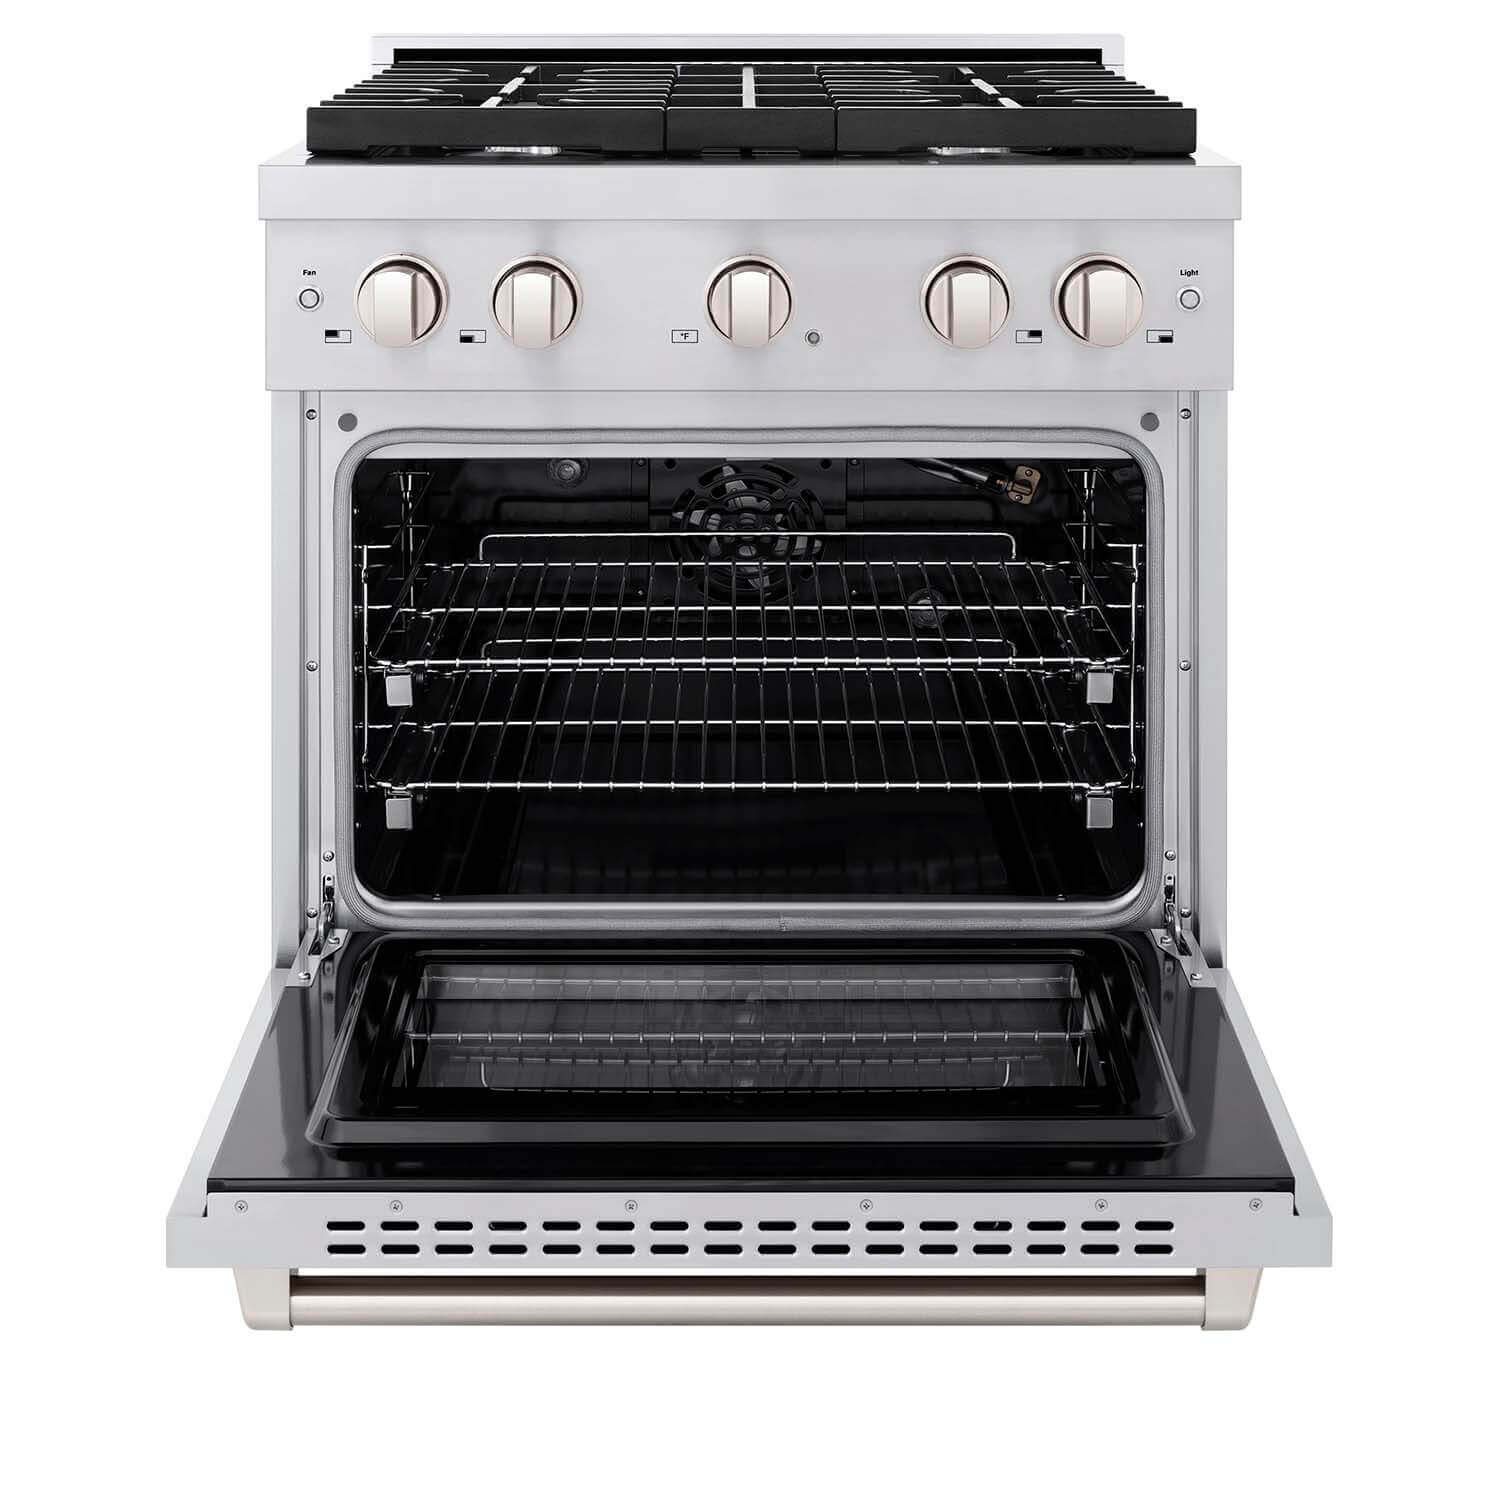 ZLINE 30 in. 4.2 cu. ft. 4 Burner Gas Range with Convection Gas Oven in Stainless Steel (SGR30) front, oven open.